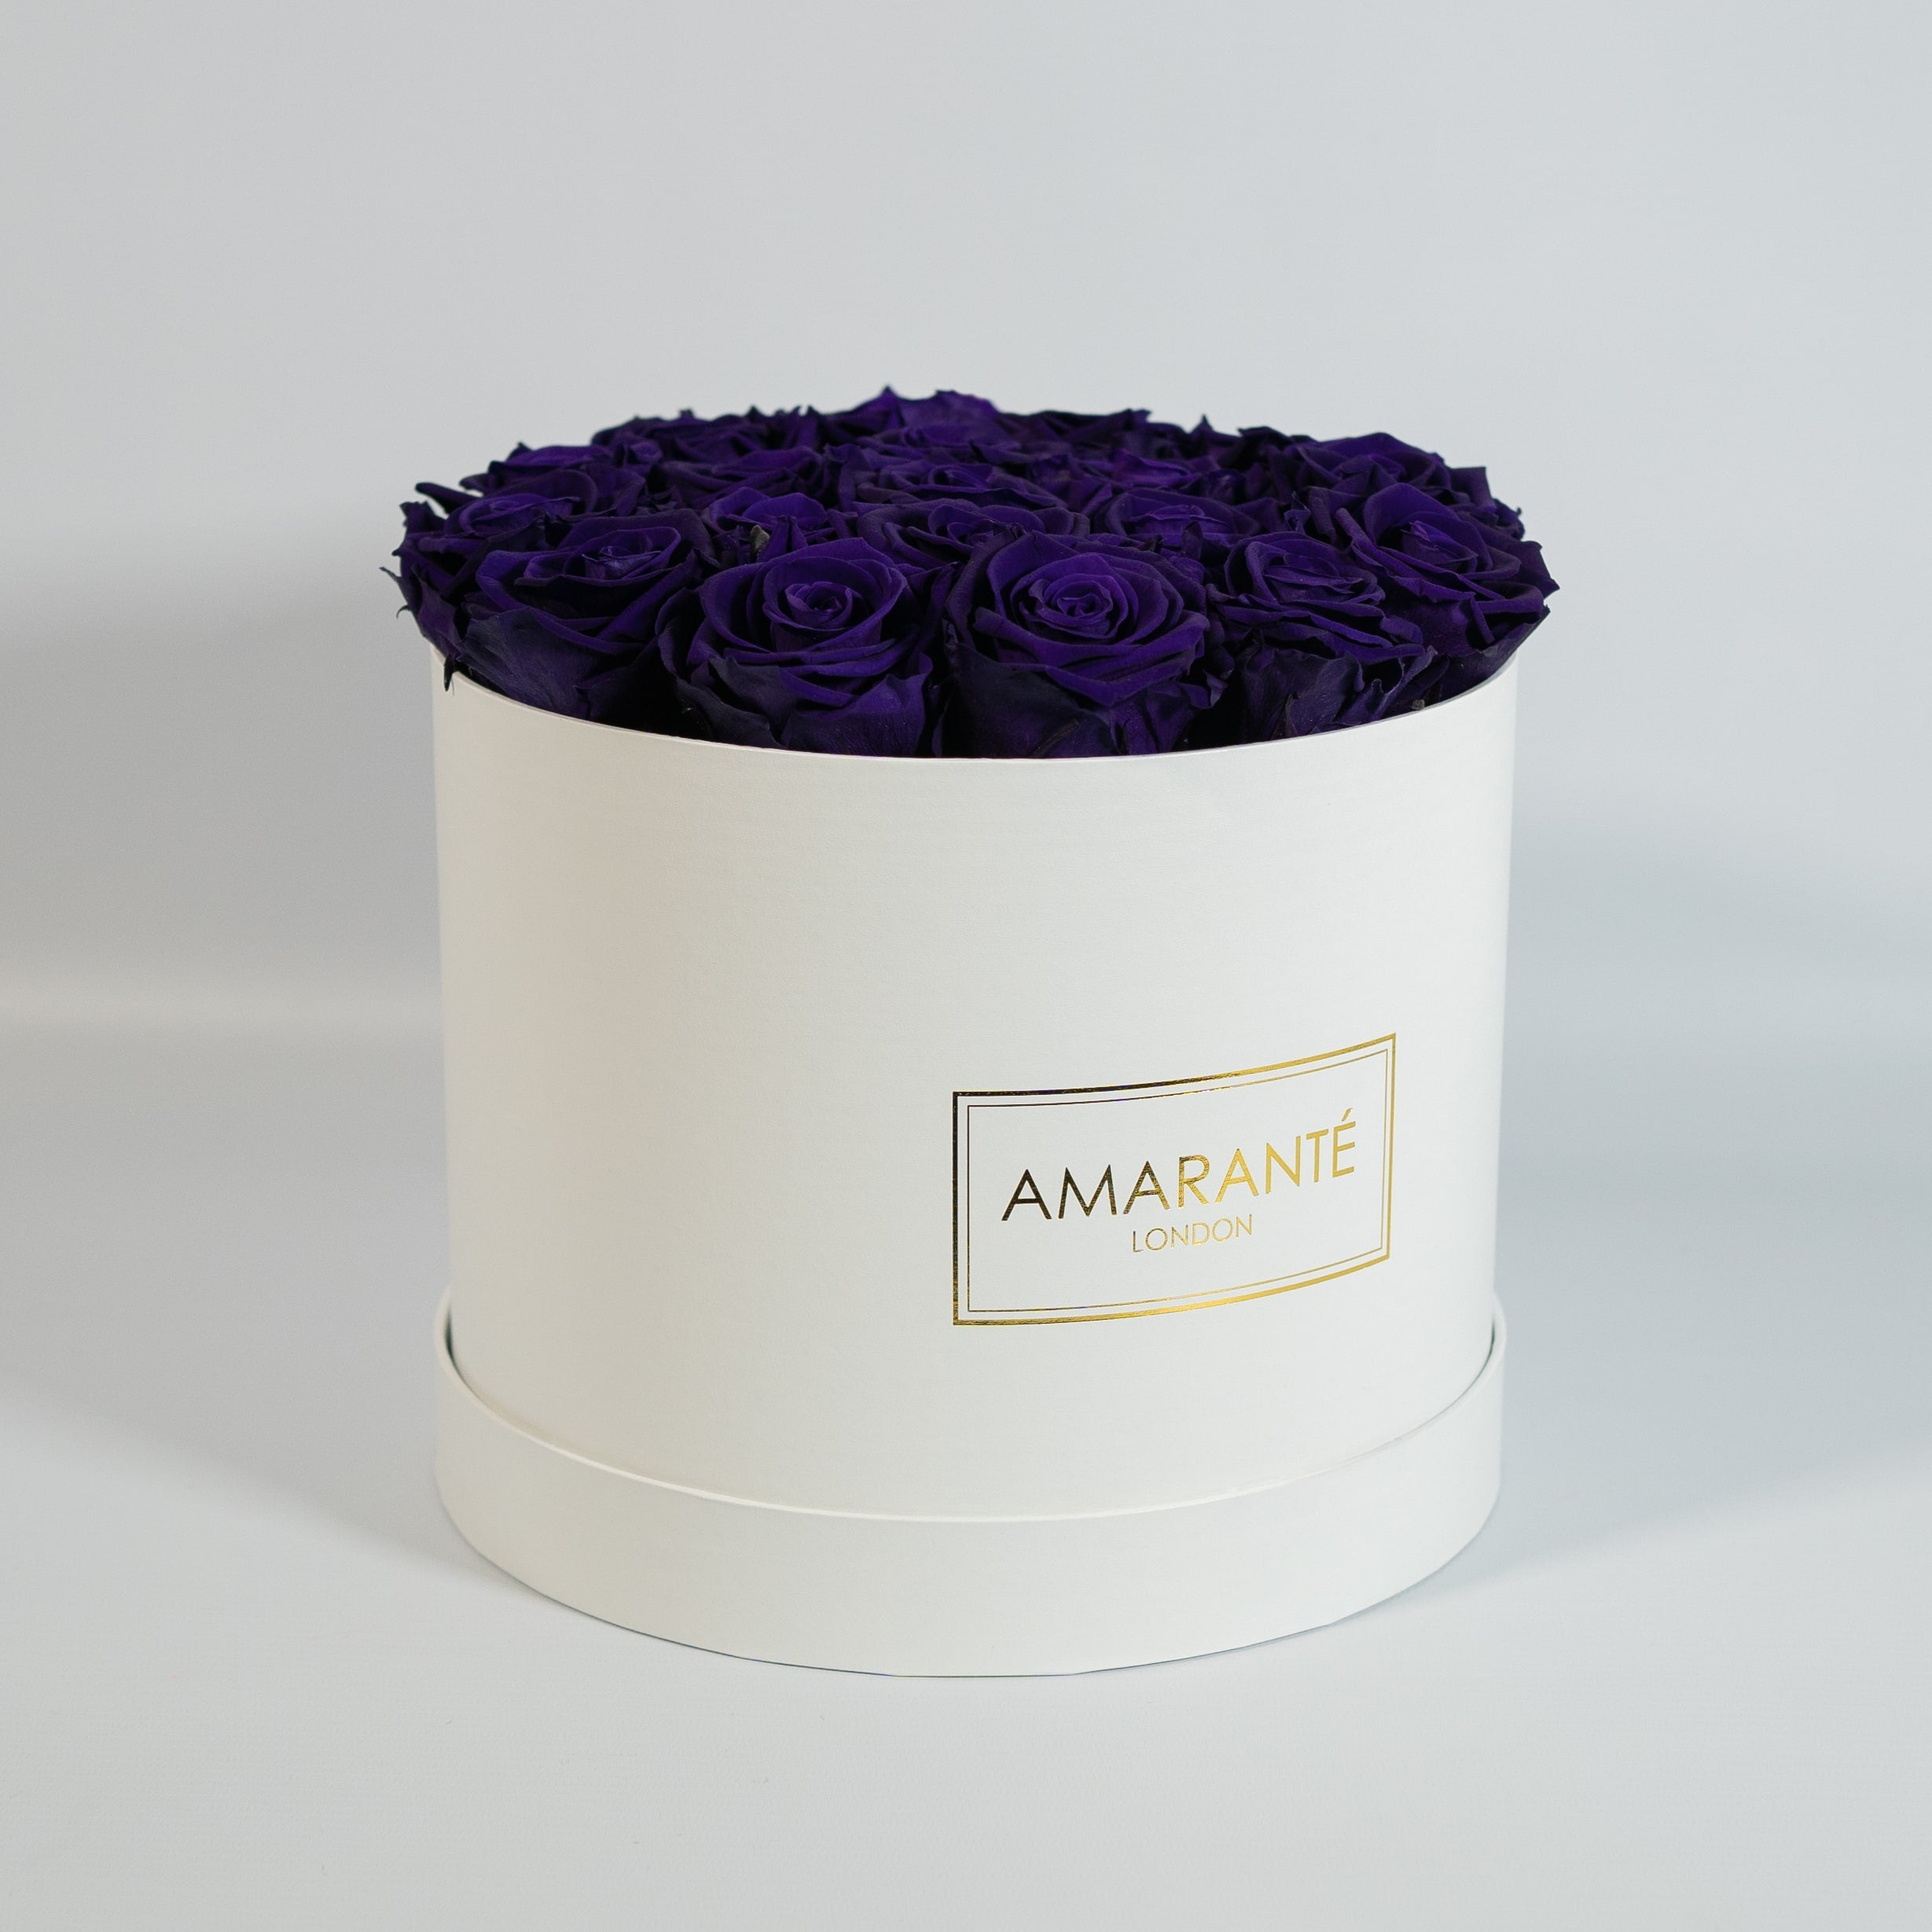 Artful dark purple Roses expressing wisdom, protection, and security. 